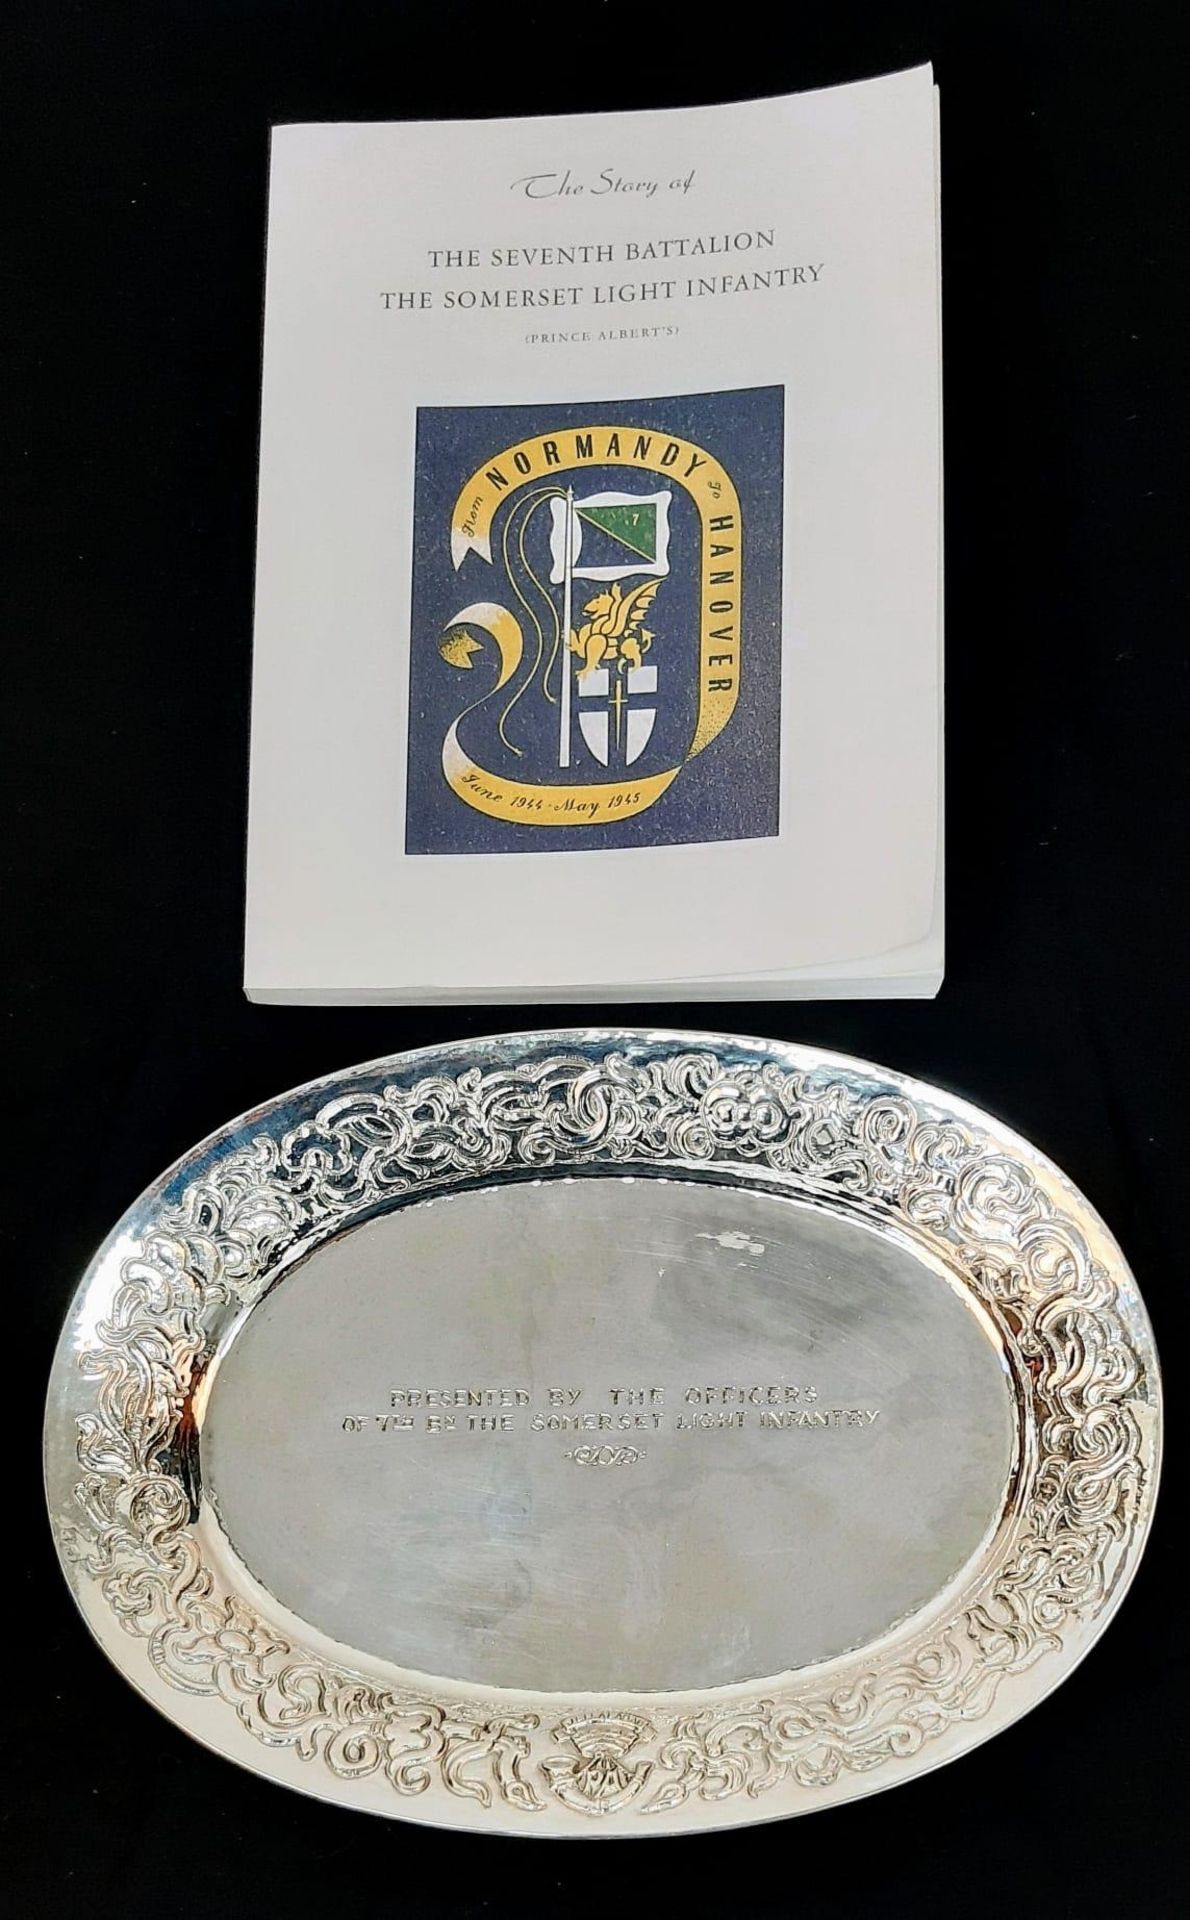 A Solid Silver (800) Decorative Serving Tray Presented by the Officers of The Somerset Light